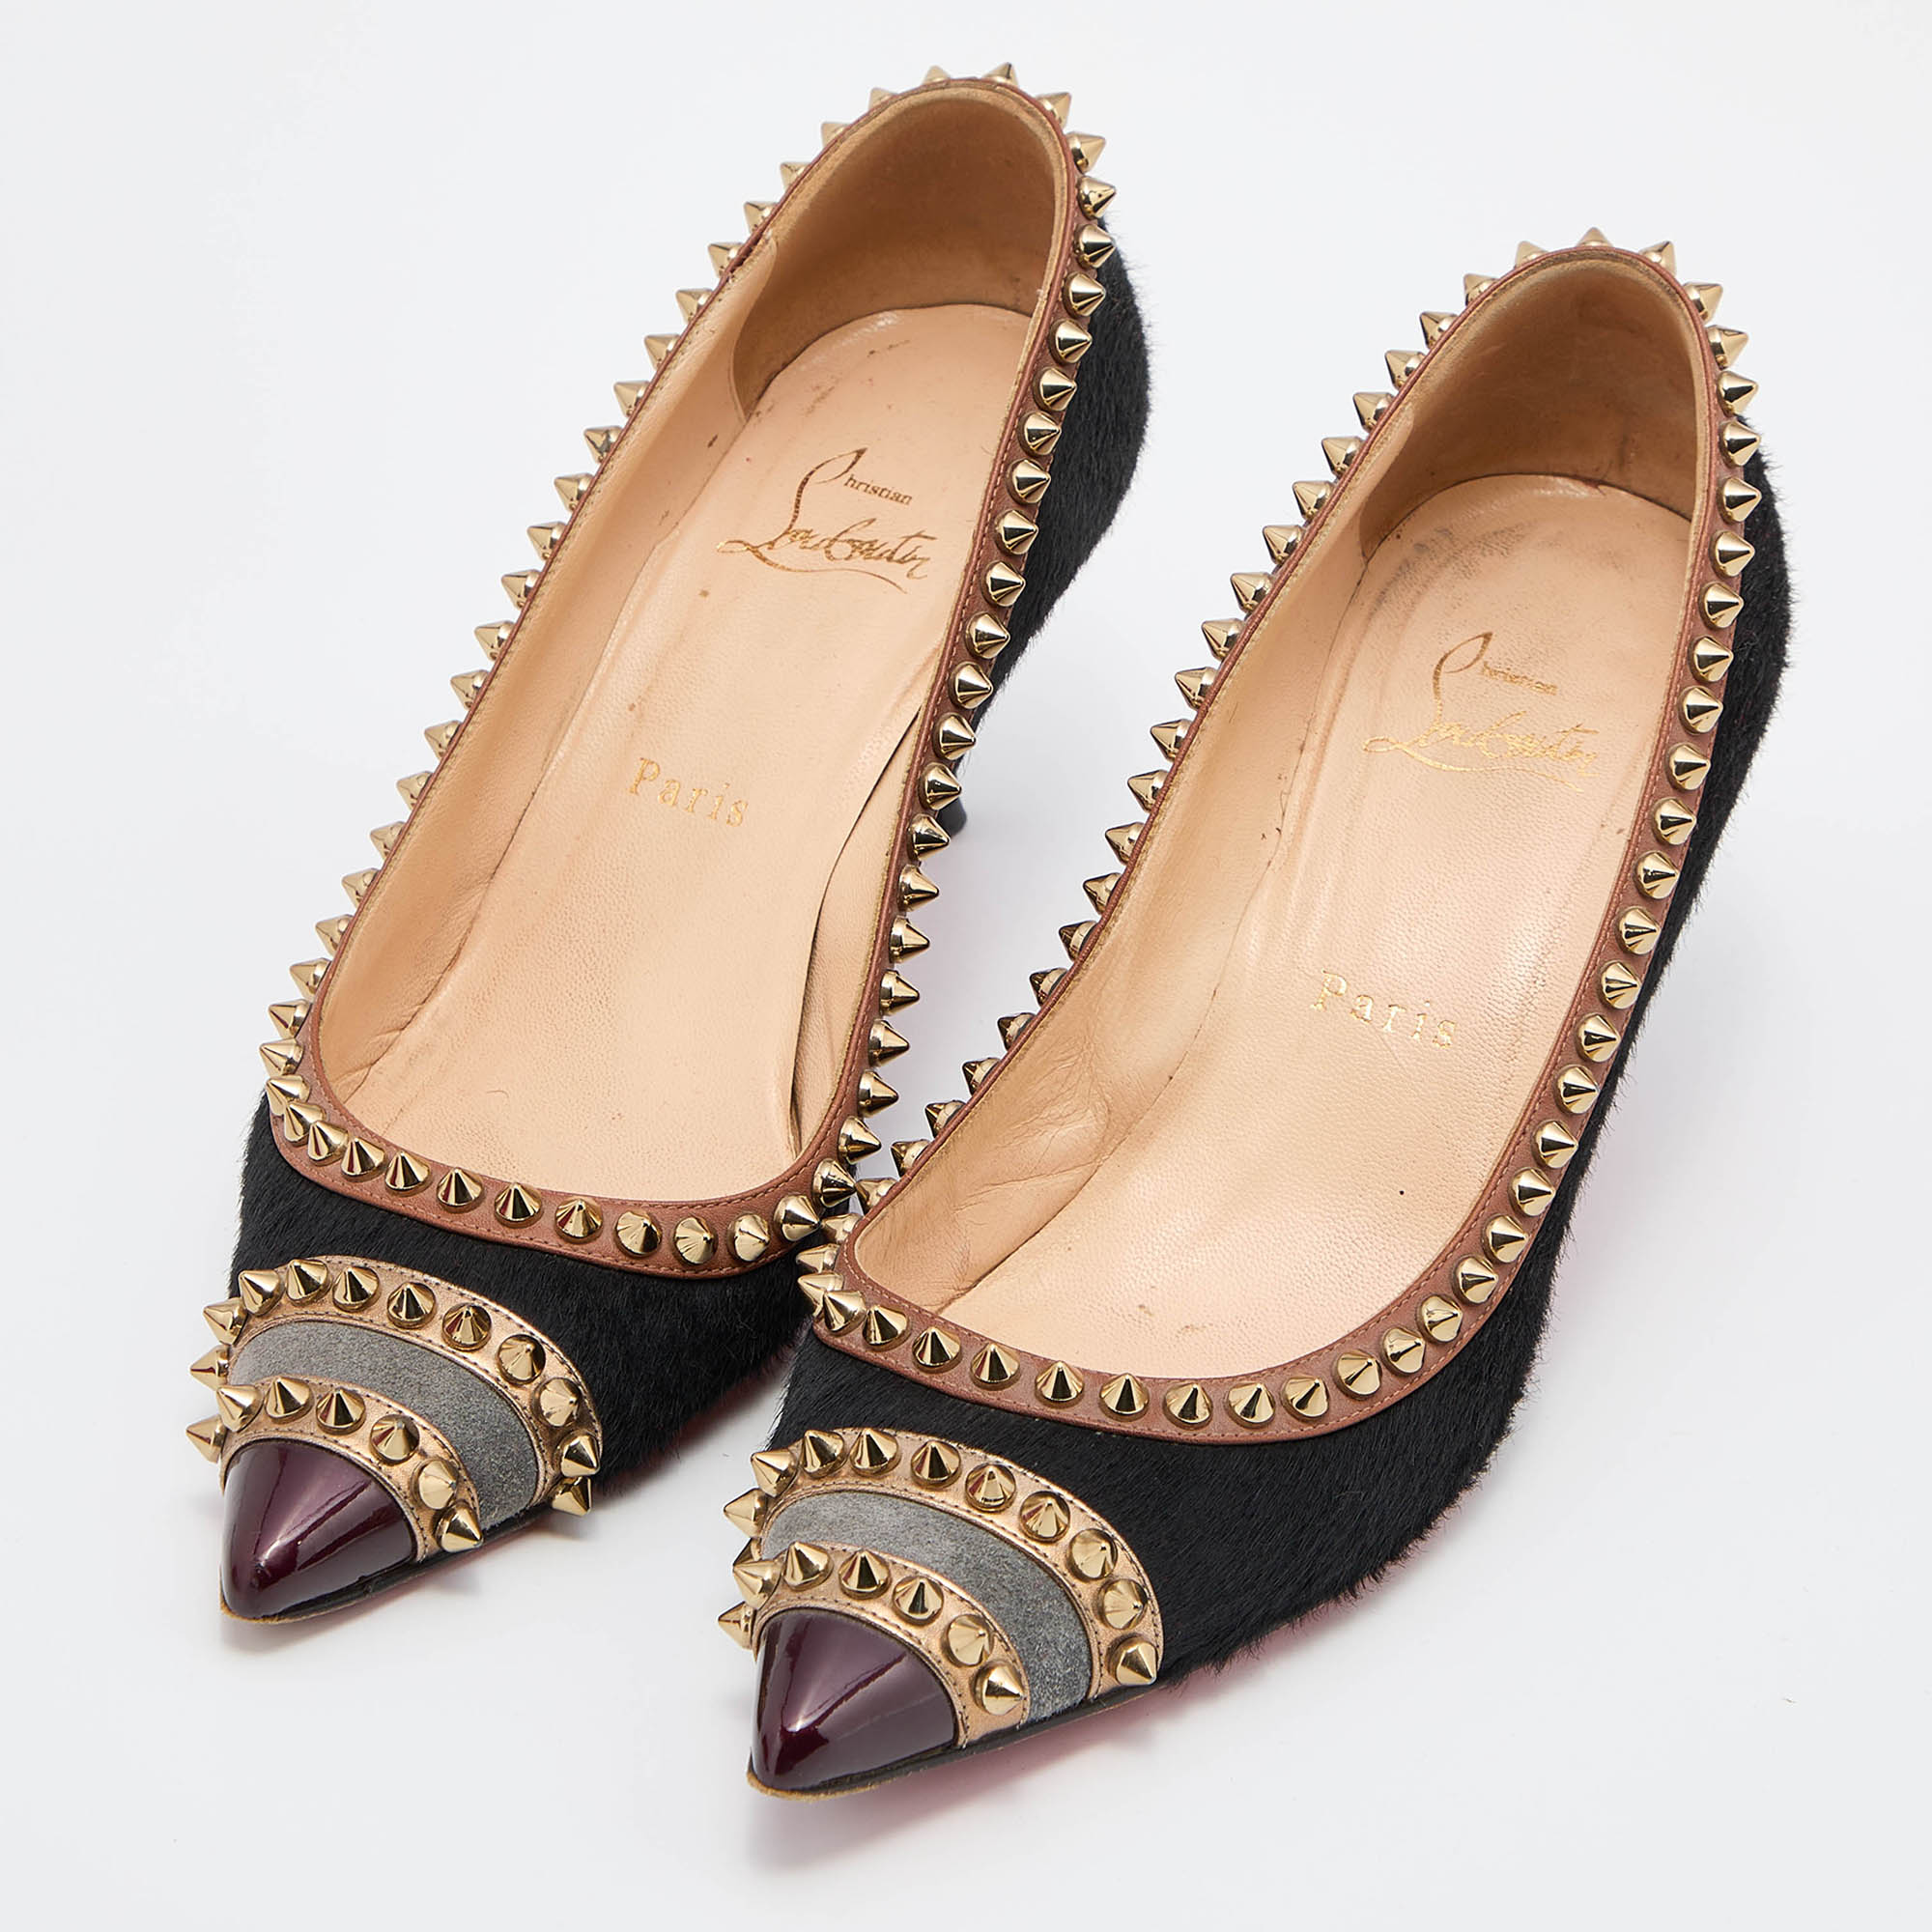 

Christian Louboutin Multicolor Calf Hair and Leather Malabar Hill Spiked Pointed Toe Pumps Size